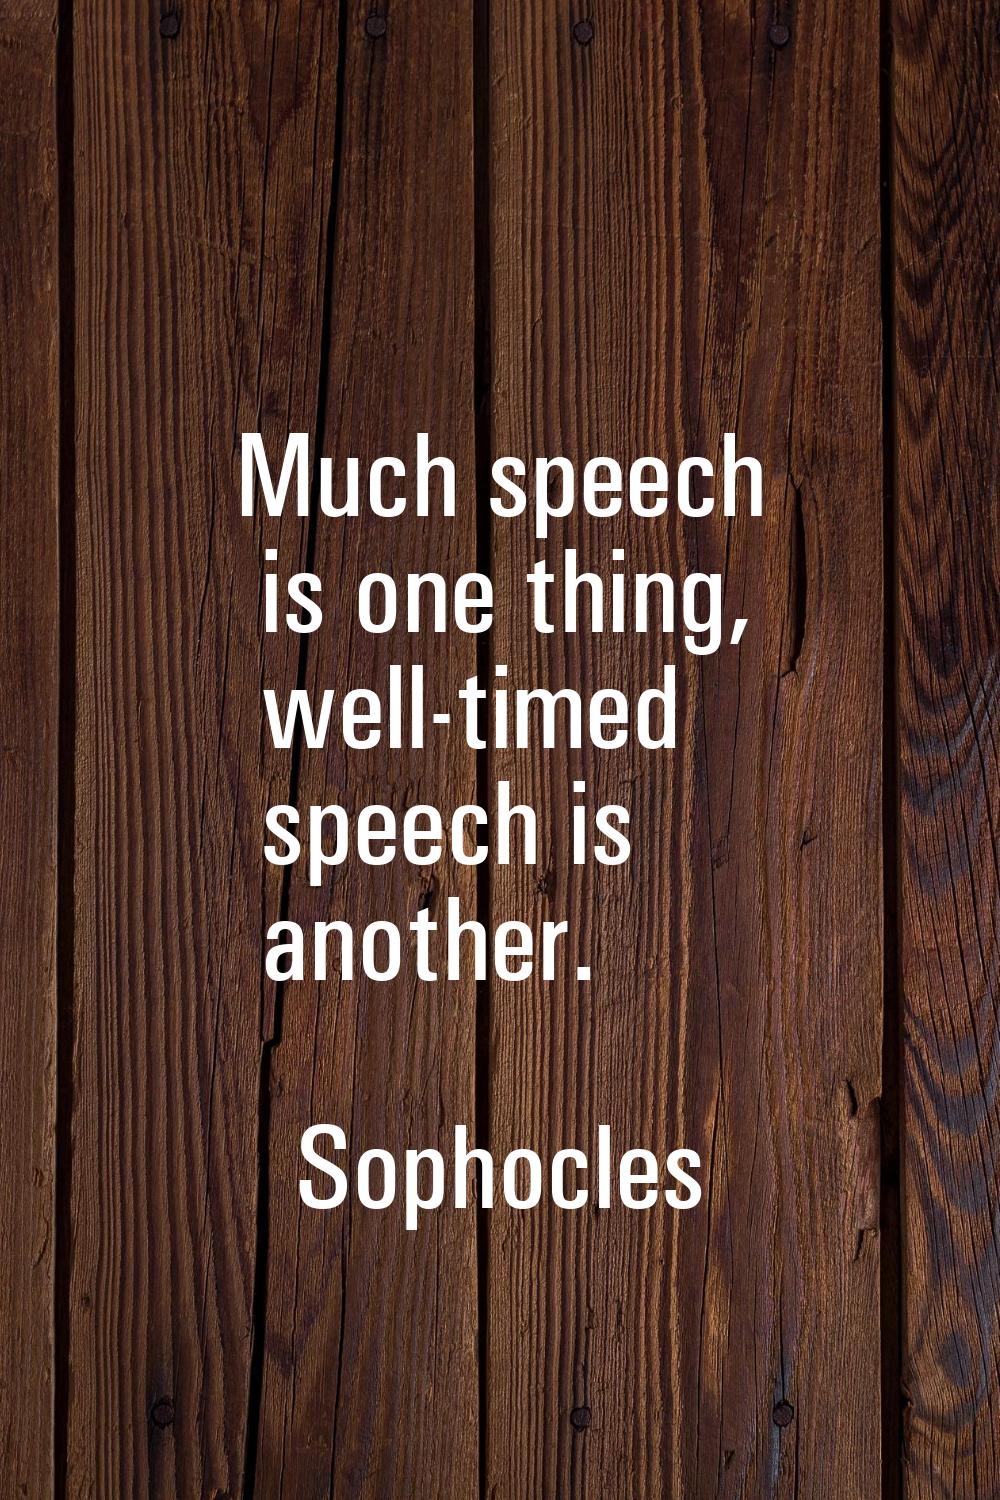 Much speech is one thing, well-timed speech is another.